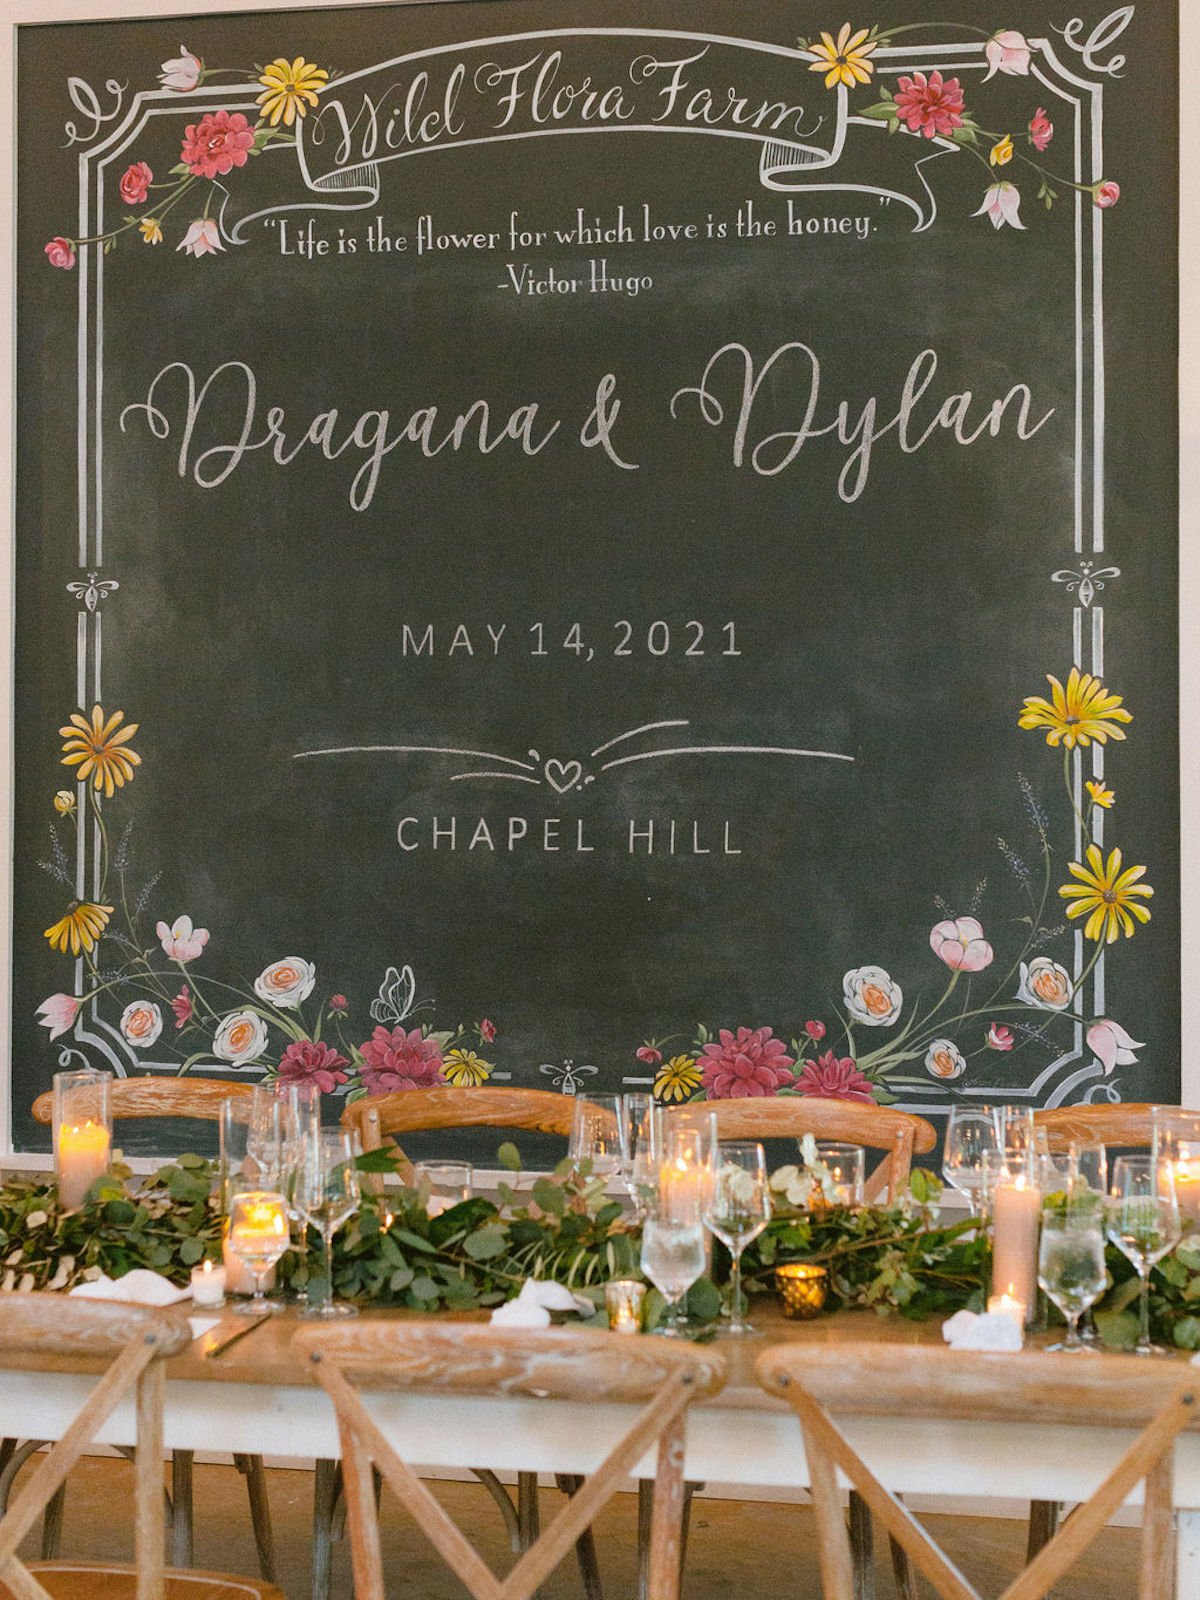 Backdrop wall behind table with chalk design and message